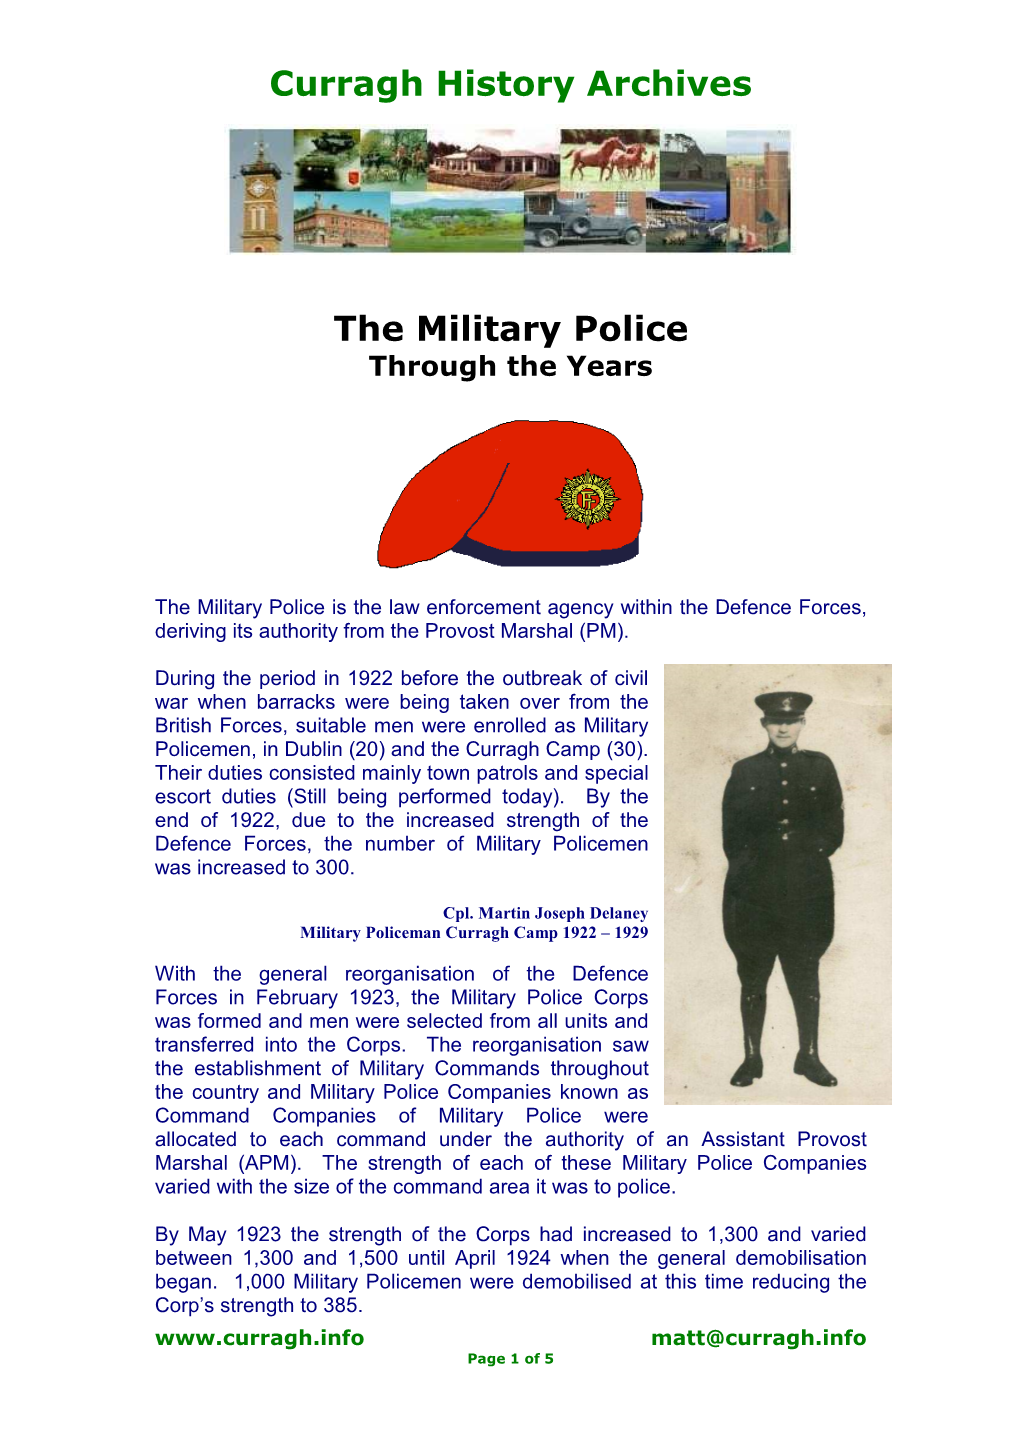 The Military Police Through the Years